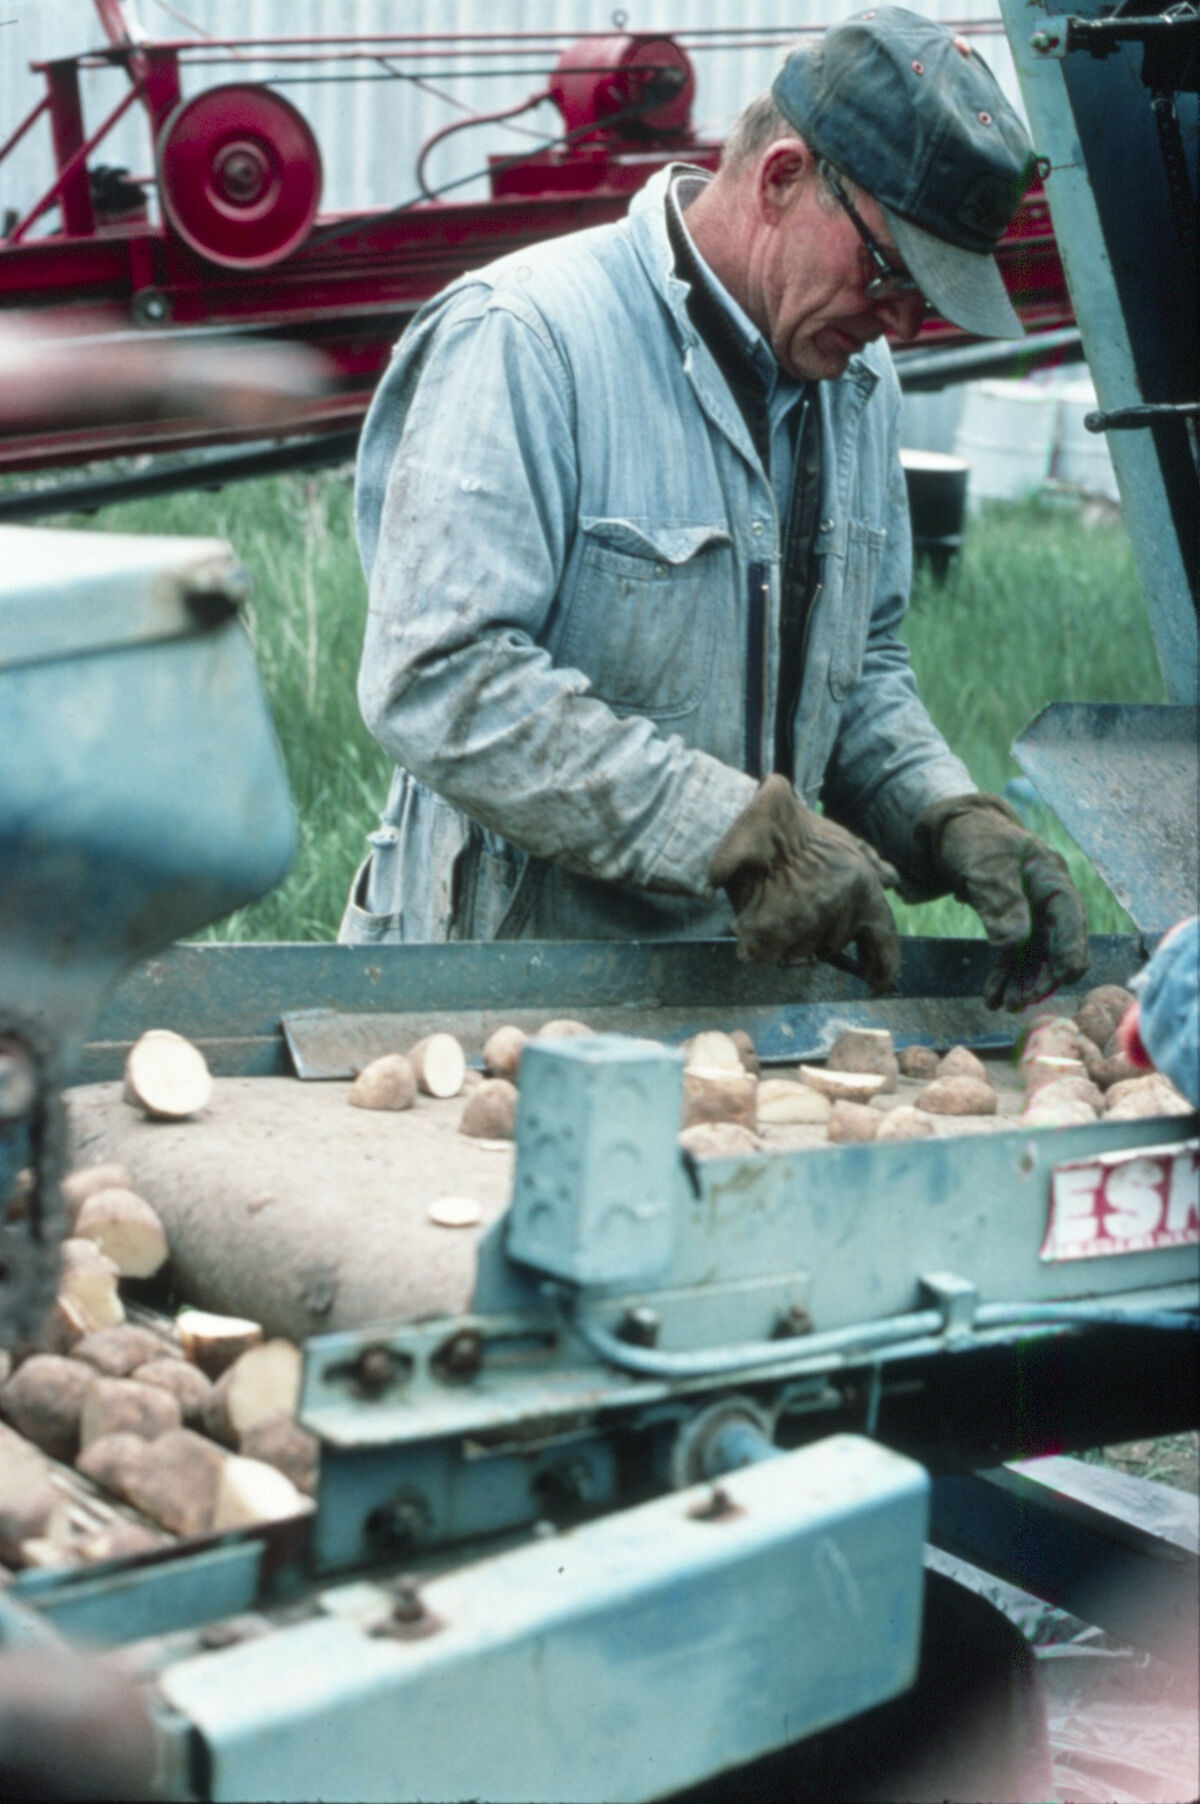 Doug Tippett sorts seed potatoes at the Tippett home place on Prairie Creek. Taken by Janie Tippett.